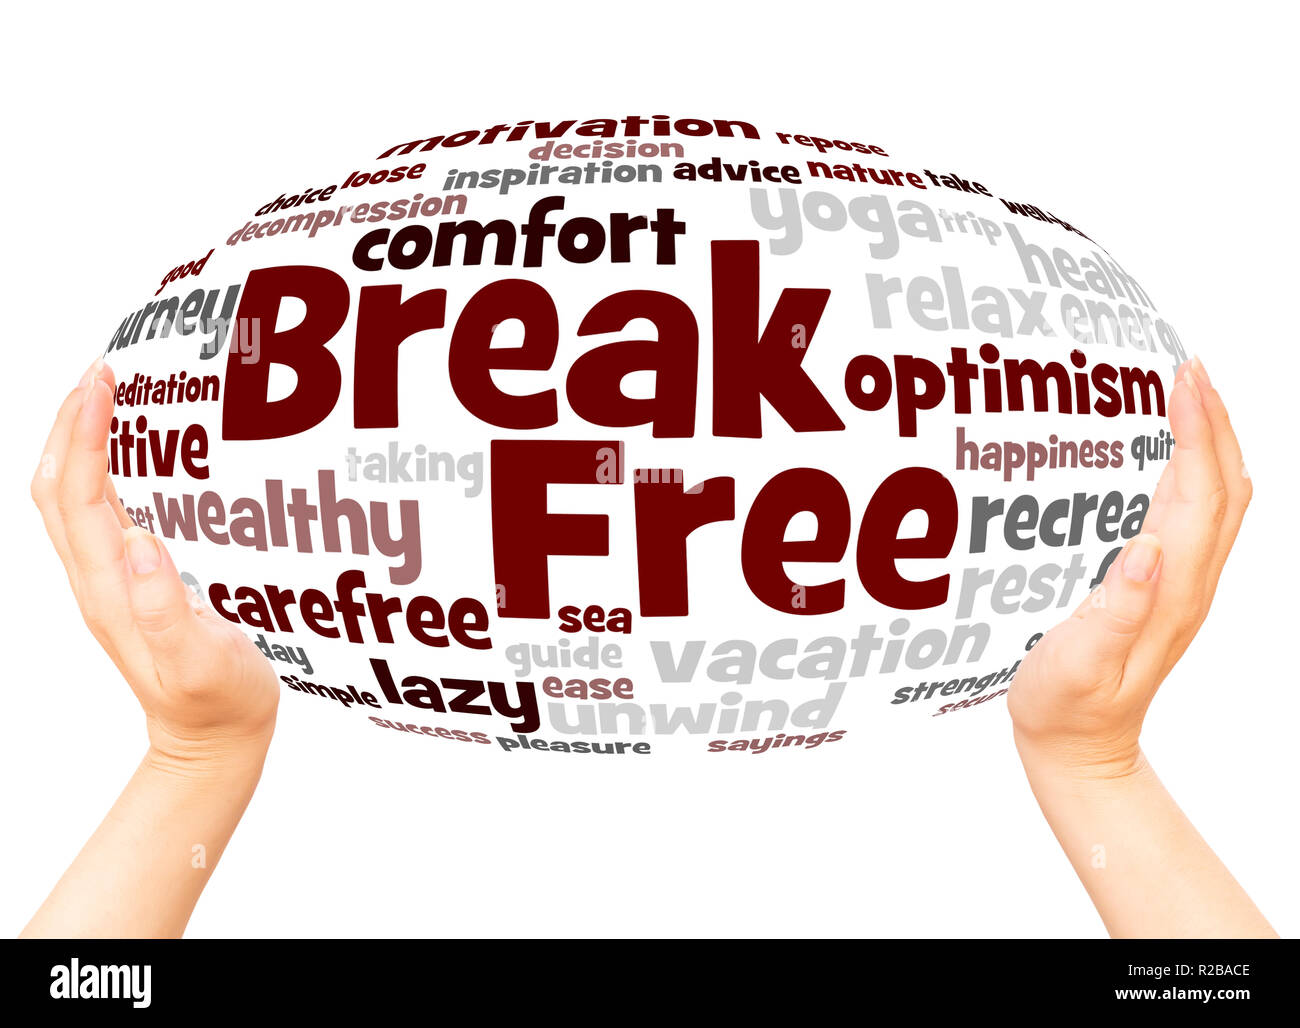 Break Free word cloud hand sphere concept on white background. Stock Photo